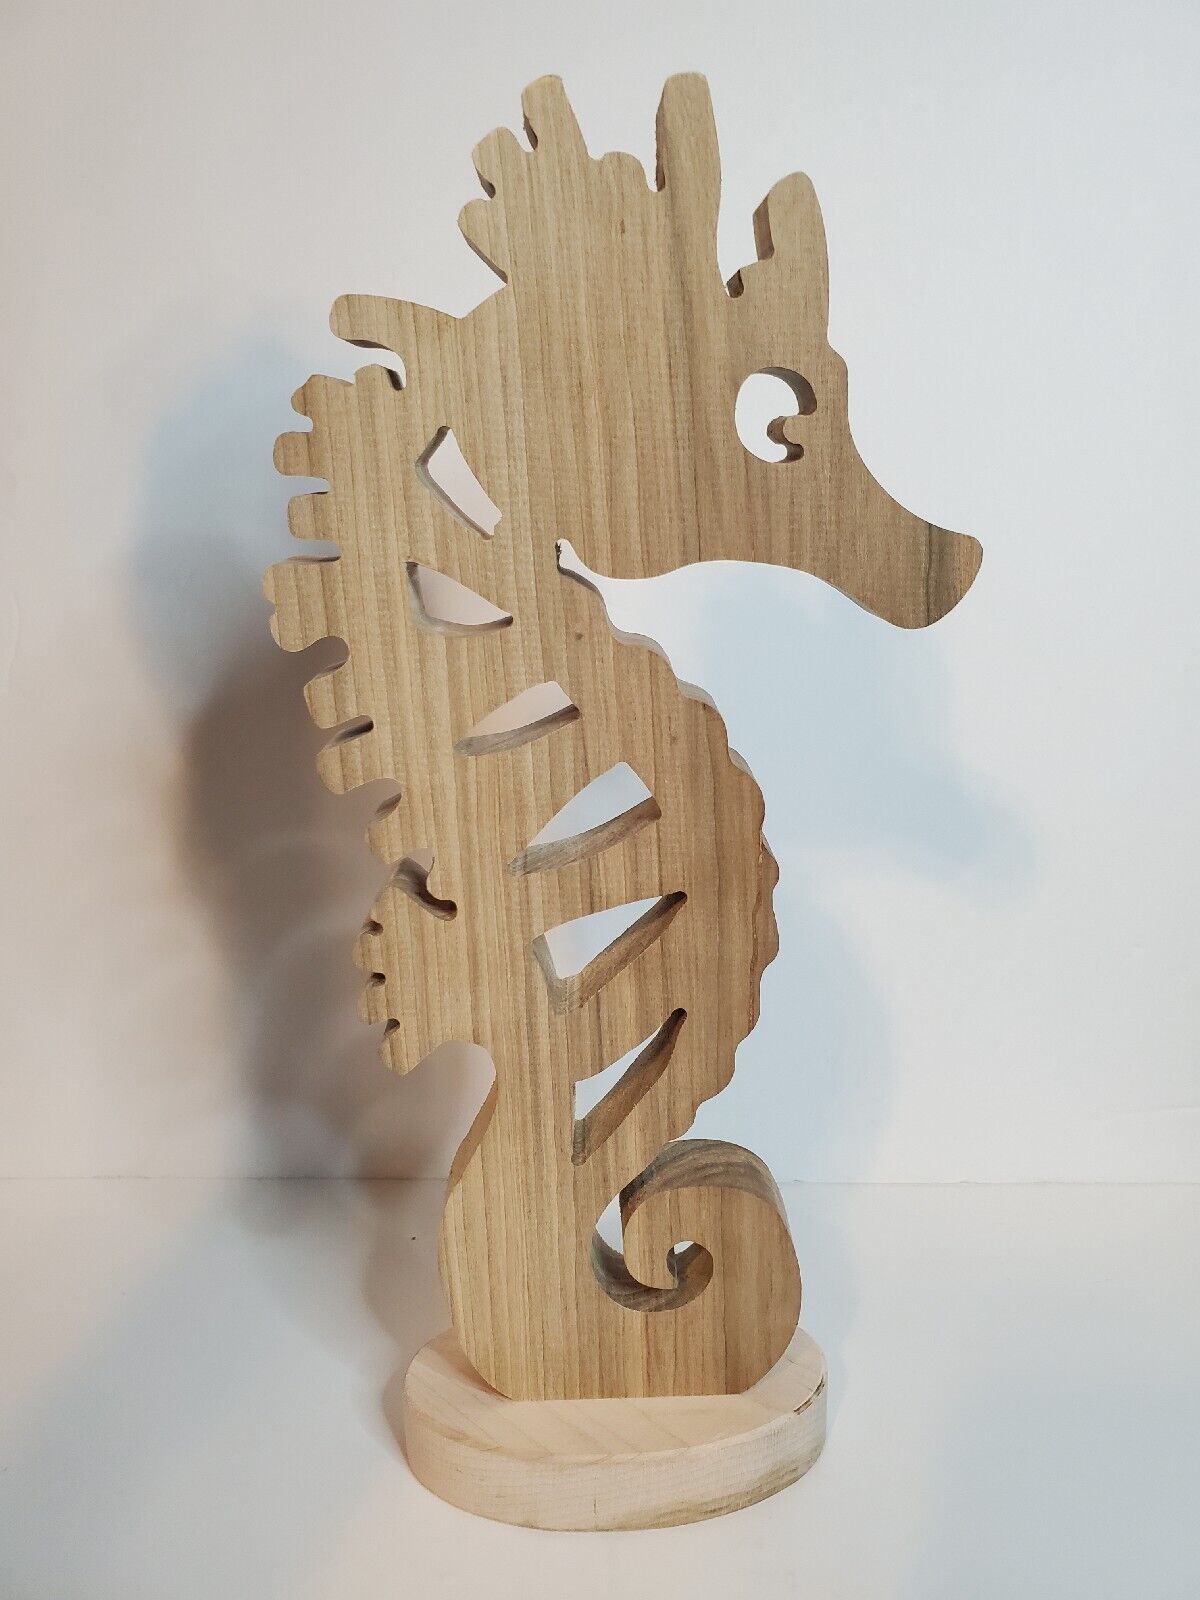 Virgin Voyages Cruise Line Wooden Seahorse By Ehylass  Paint Decorate #1 Art 